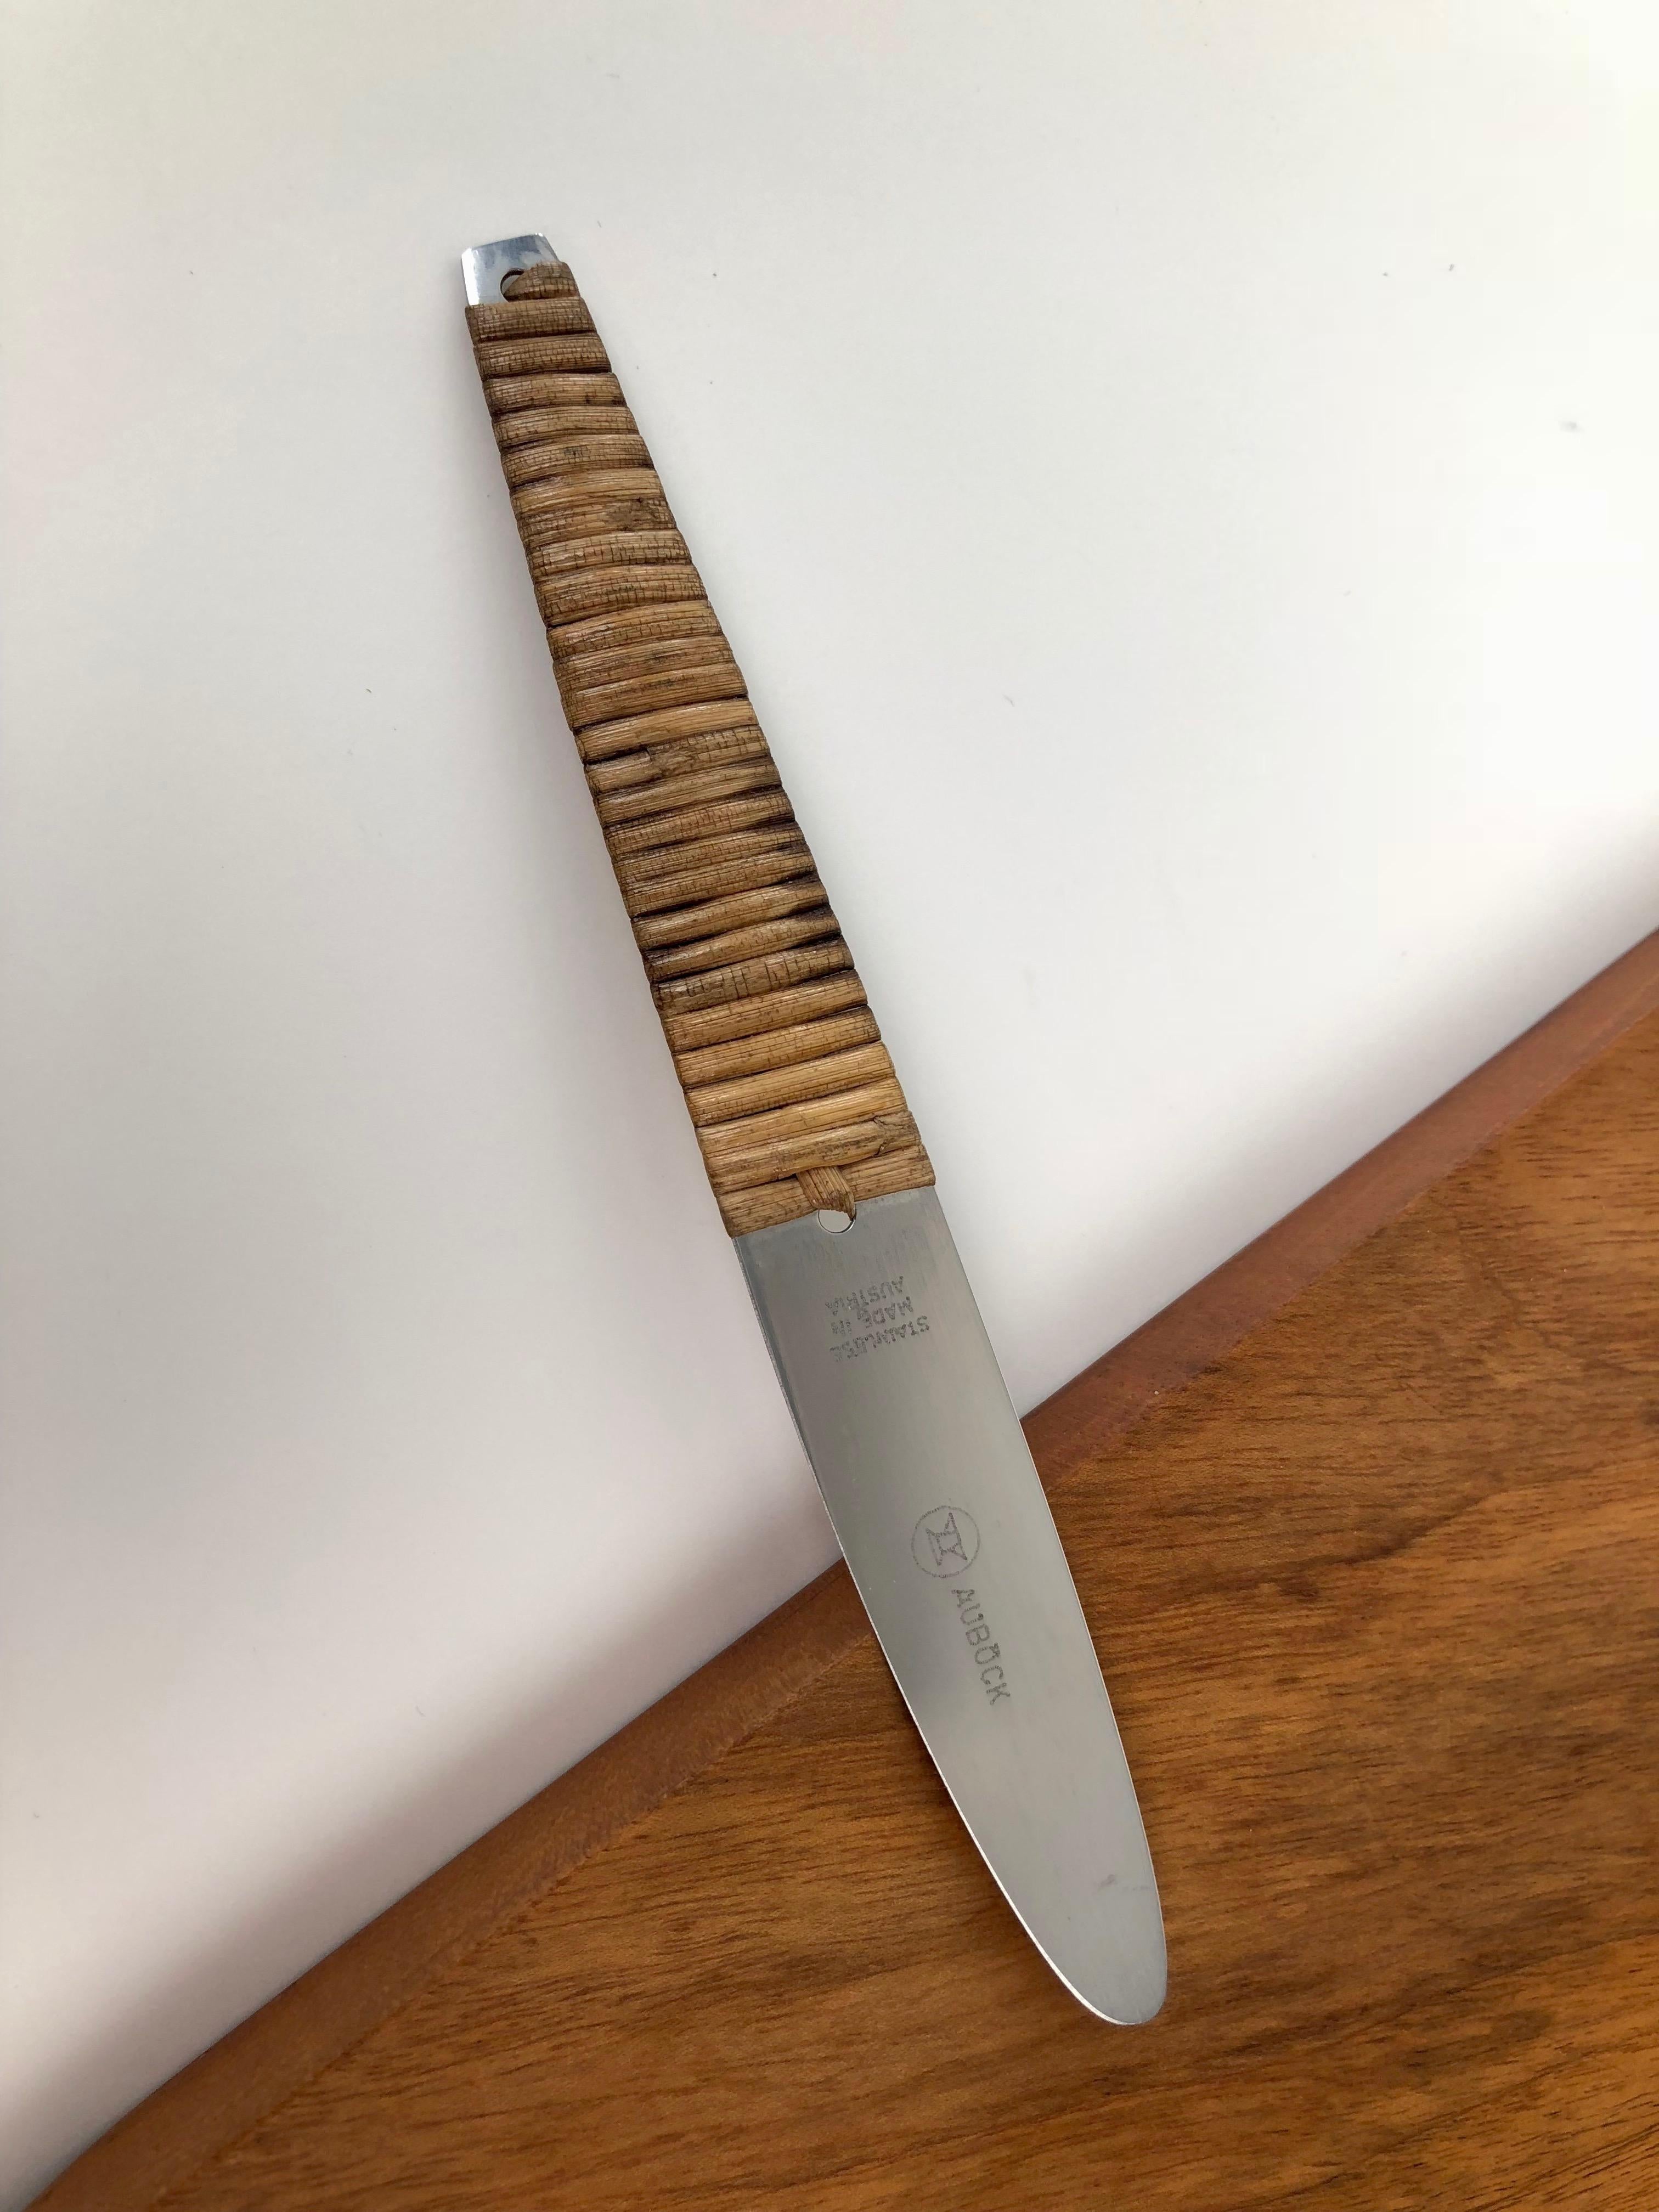 A beautiful vintage triangular cutting board and knife set, designed and made by Carl Auböck in the 1950s. The board is walnut with leather
loop that holds the knife. The knife is manufactured by Amboss Austria and is fully marked.